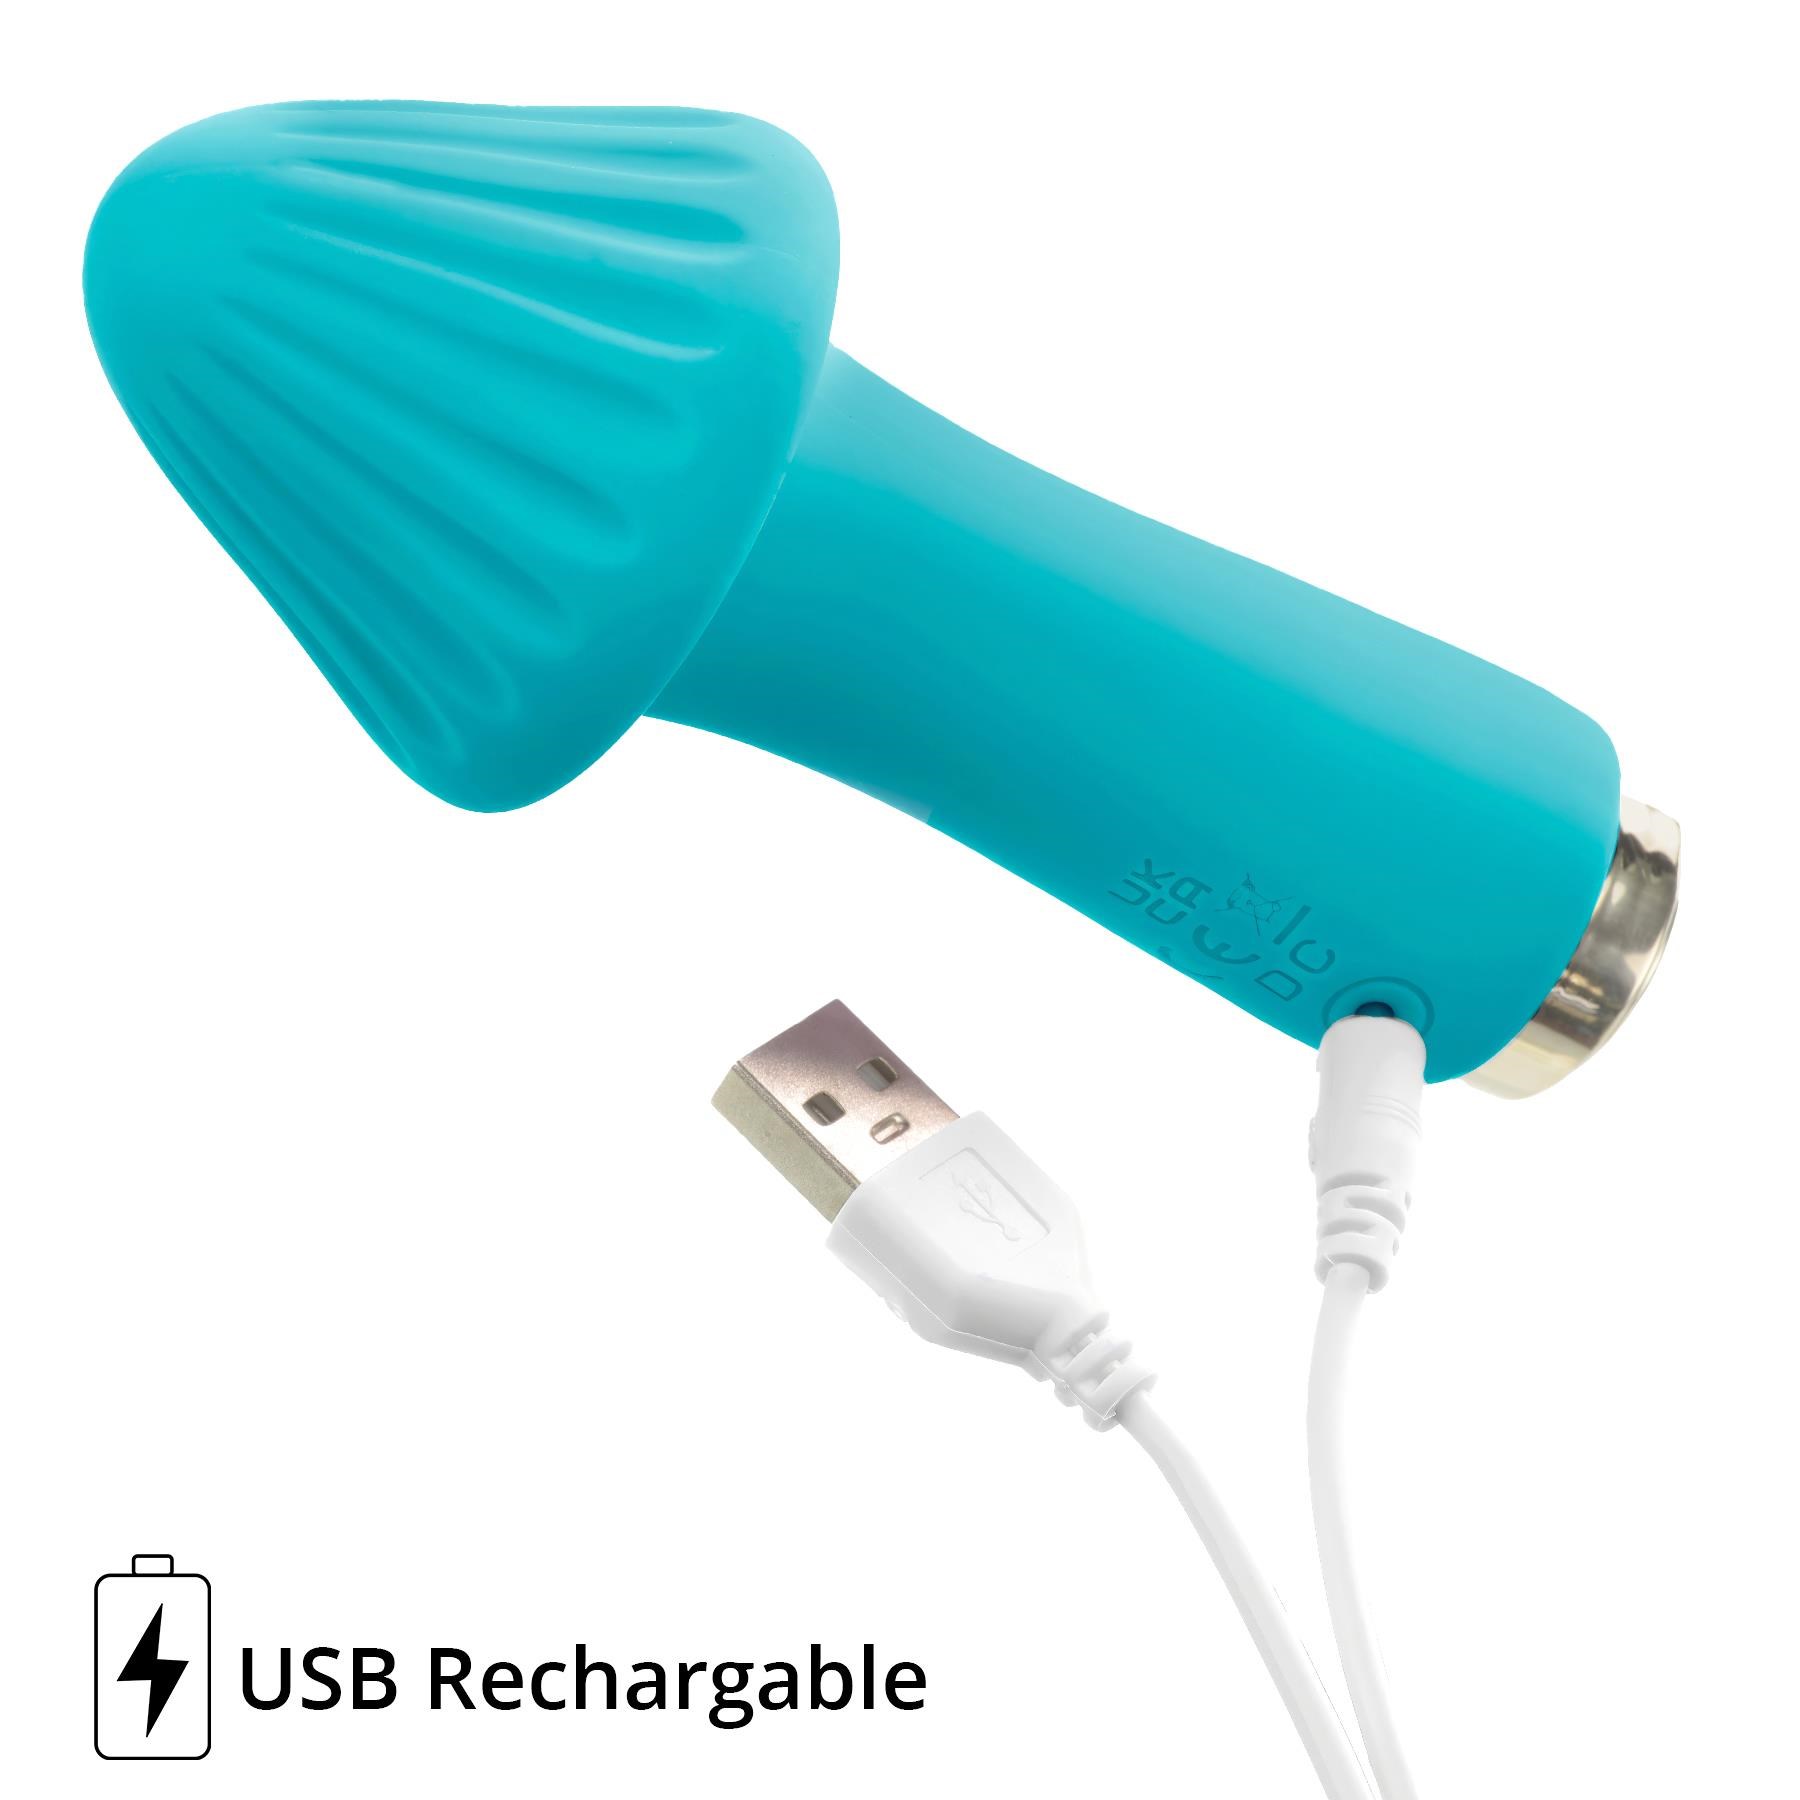 My Secret Shroom Vibrator - Product Shot with Charging Cable